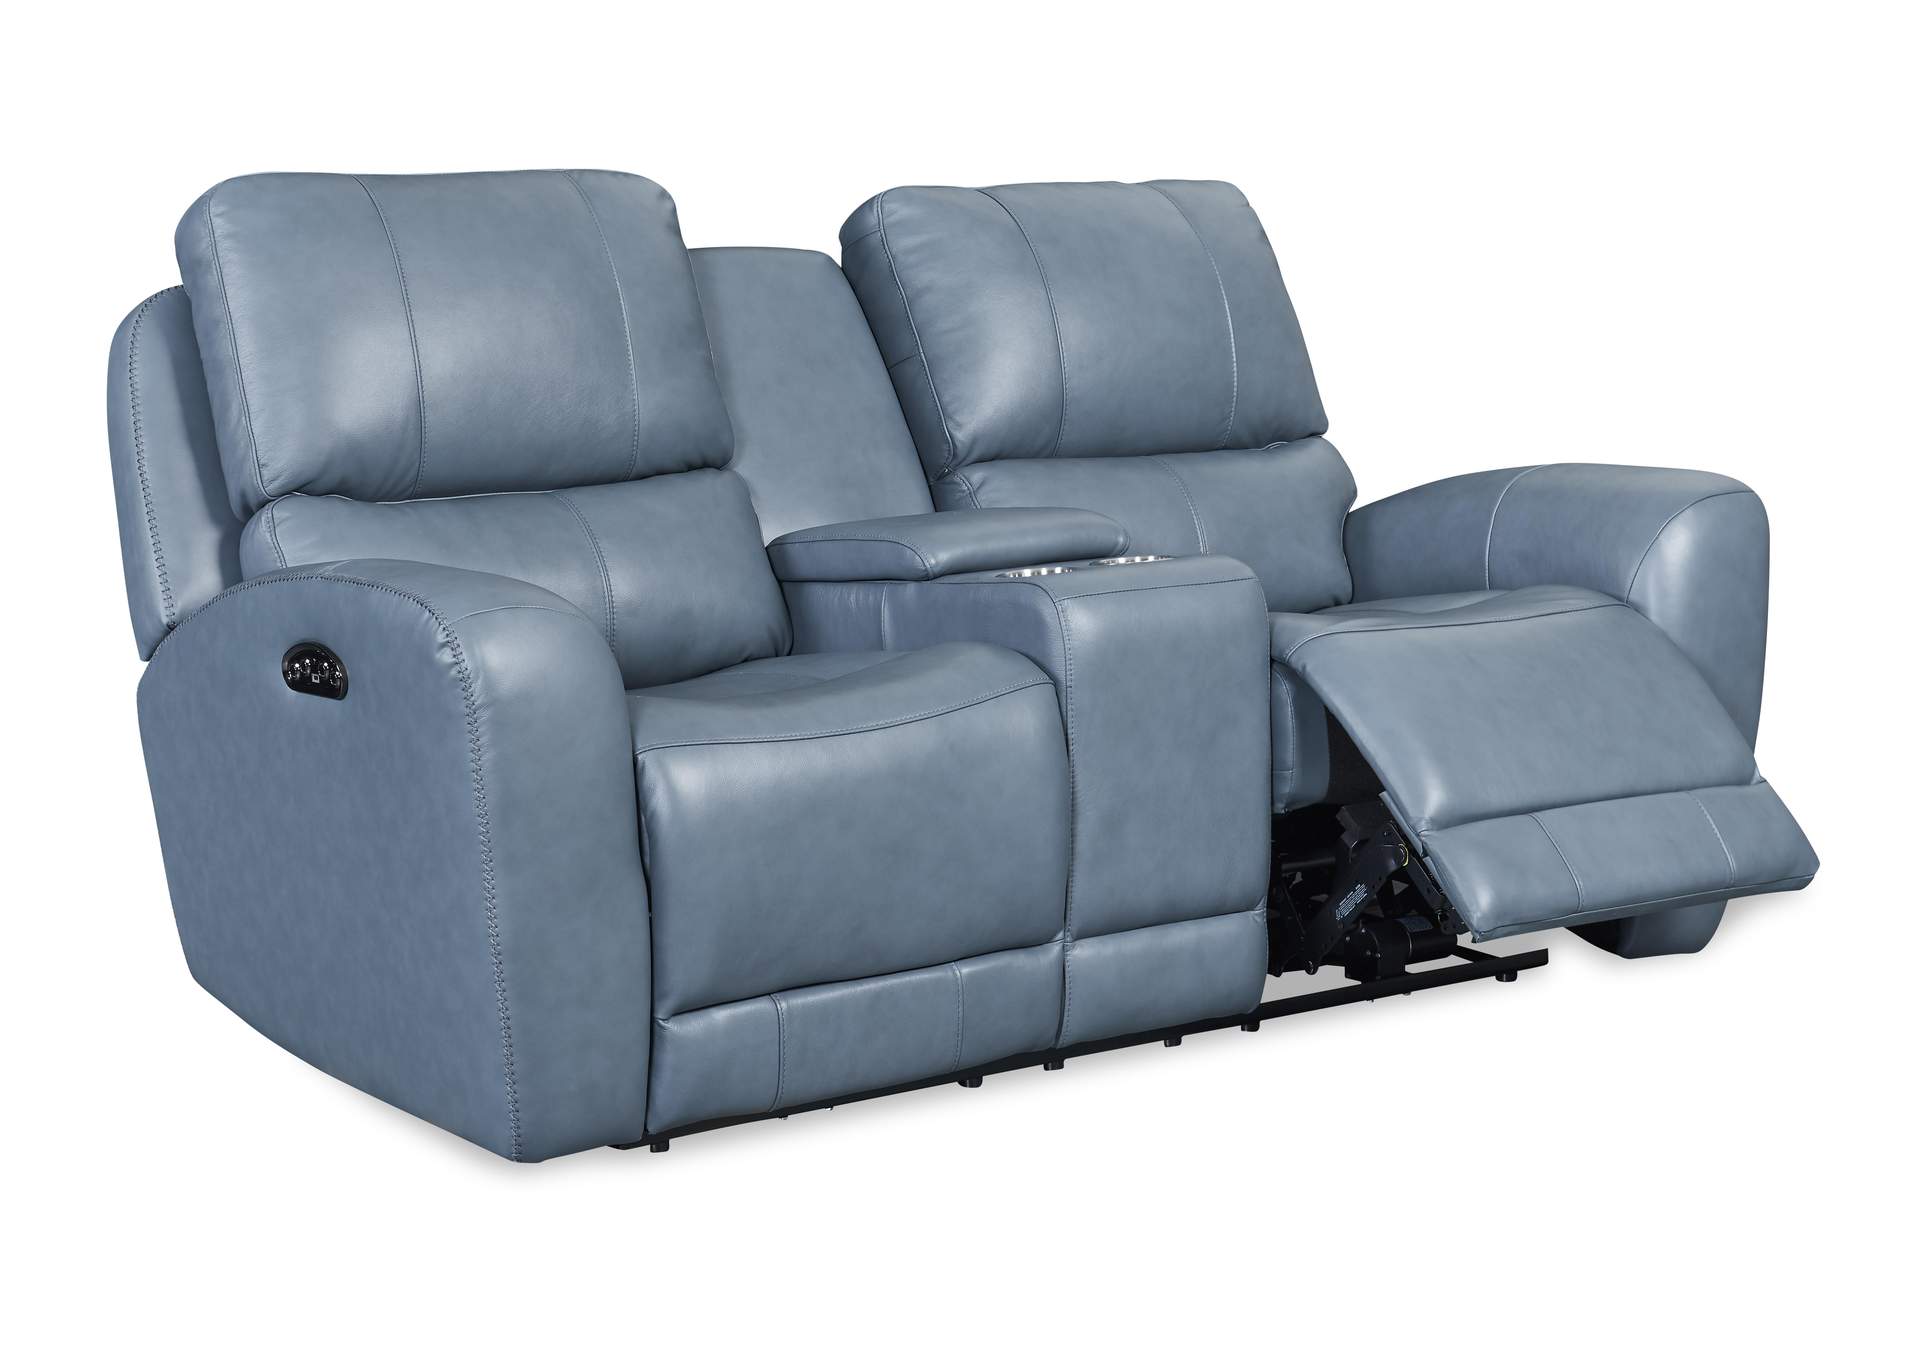 Cambria Eh295 Bel Air P2 Console Loveseat 6027Lv Blue,Leather Italia USA